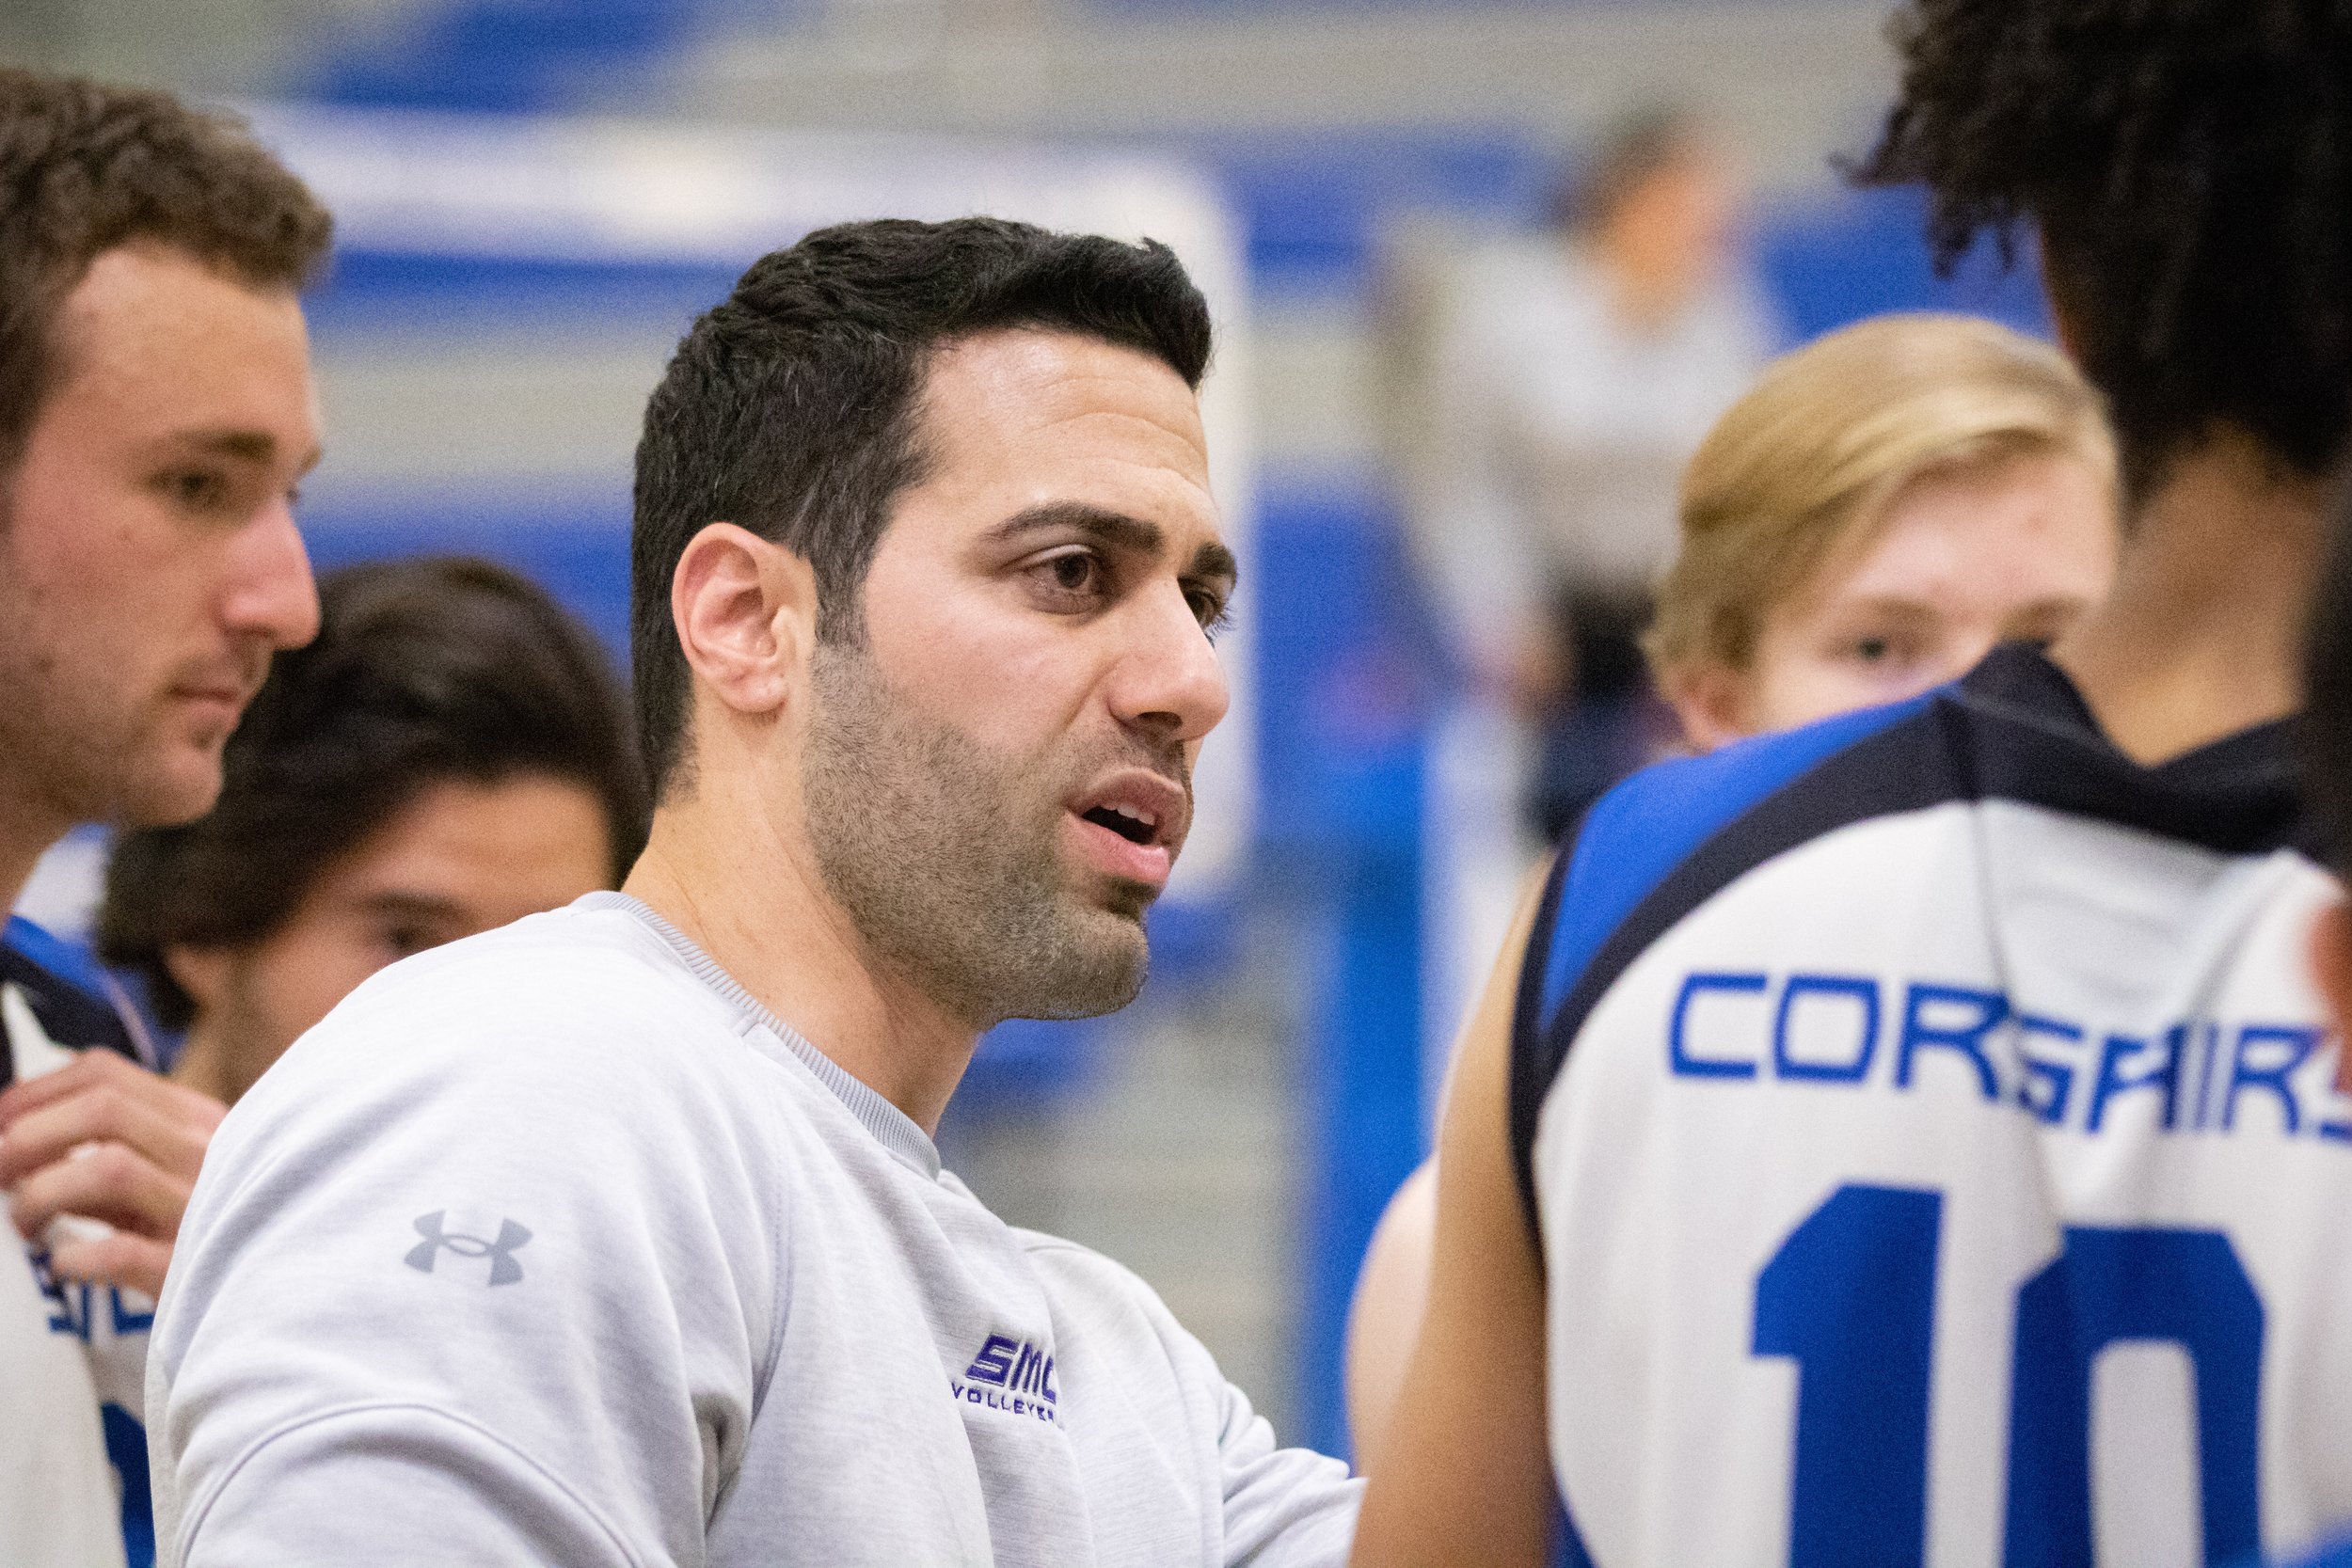  Santa Monica College Corsairs men's volleyball headcoach Liran Zamir talking to the Corsairs during a timeout in the first set of a home game against Santa Barbara City College Vaqueros in Santa Monica, Calif., on Friday, March 24, 2023. The game re